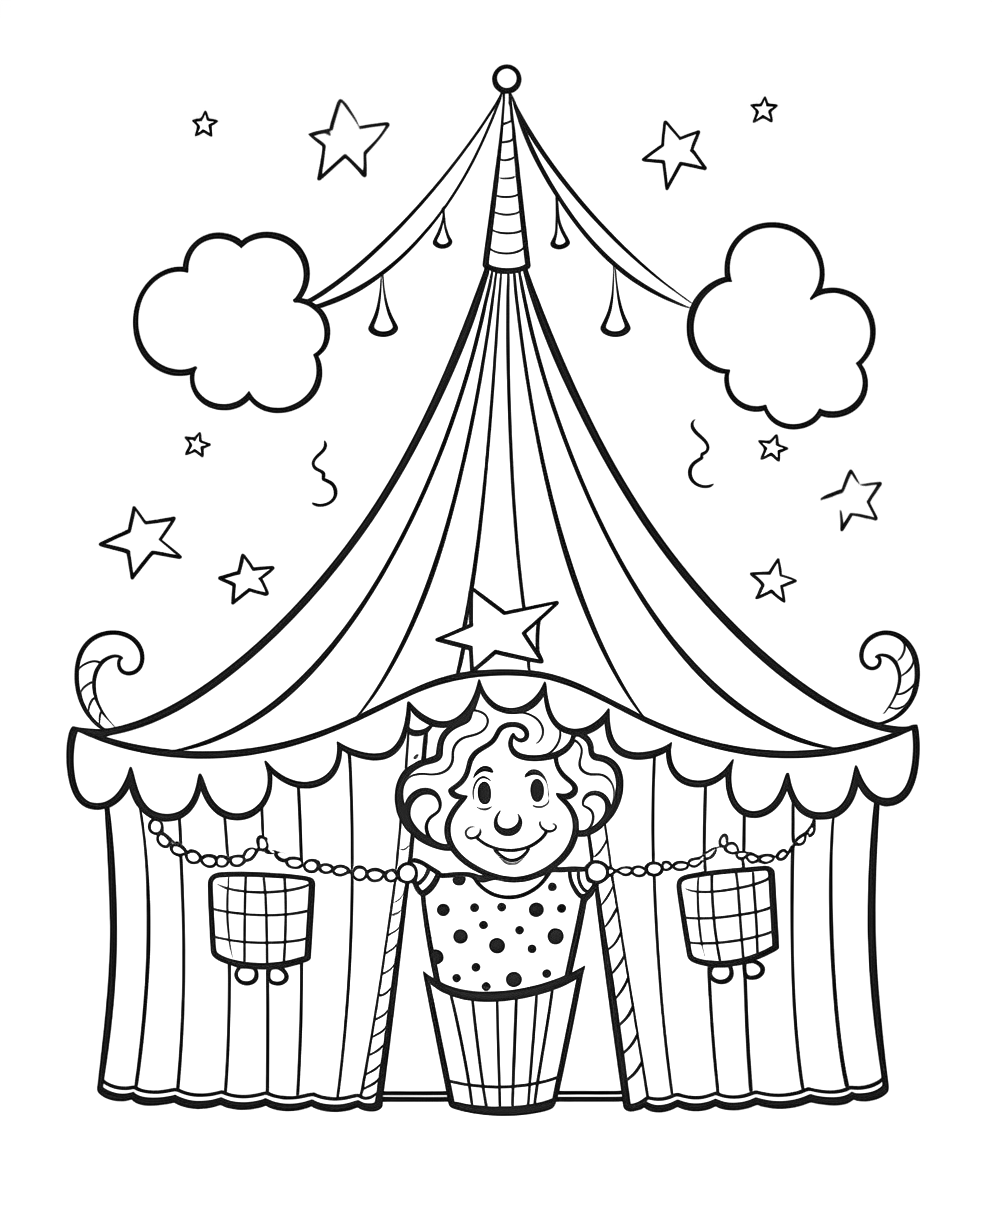 coloring-page-carnival-47 | coloring-plates-kind.com